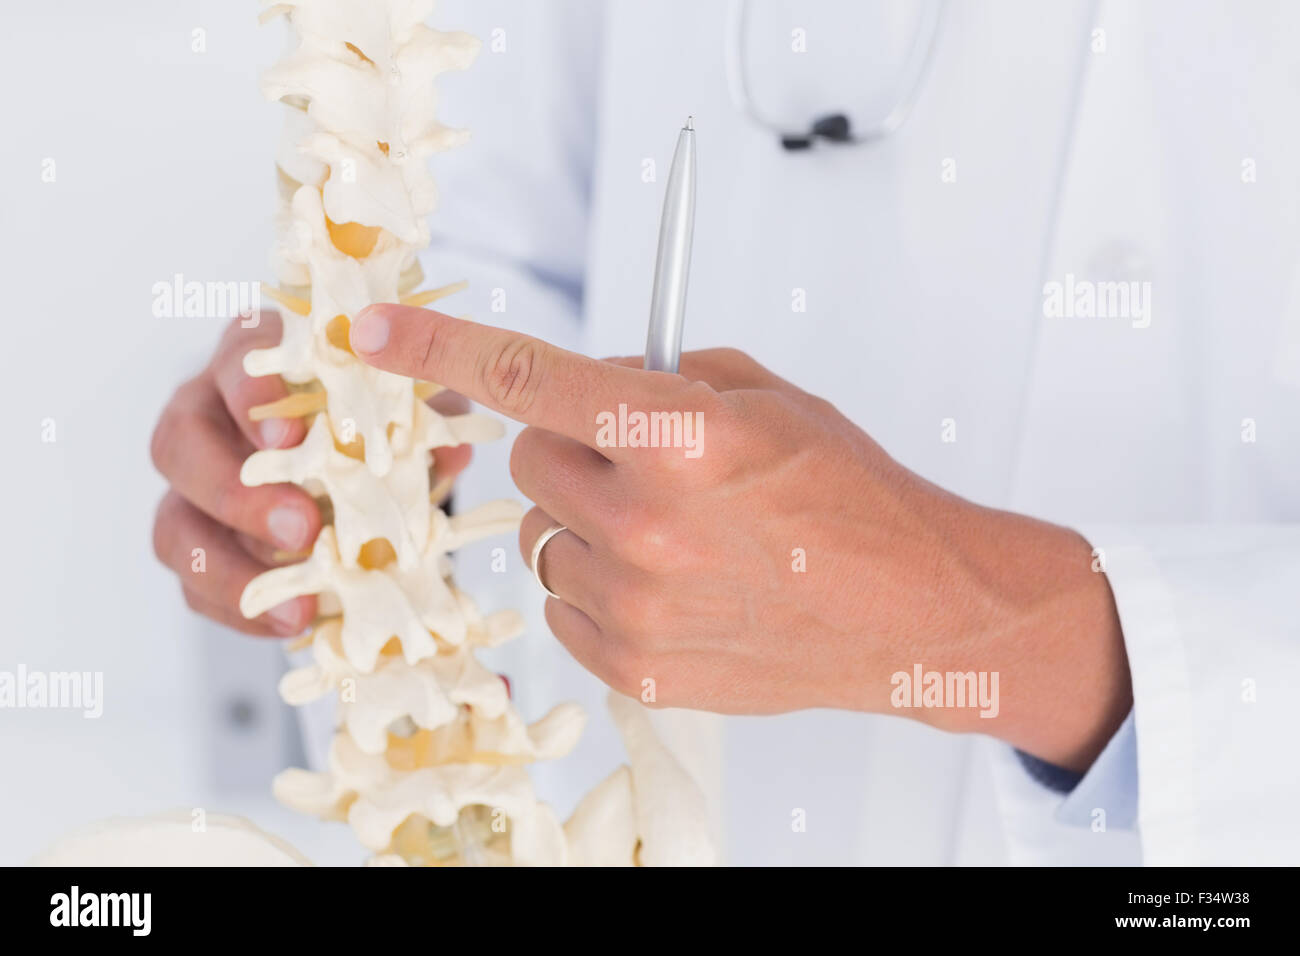 Doctor showing anatomical spine Stock Photo